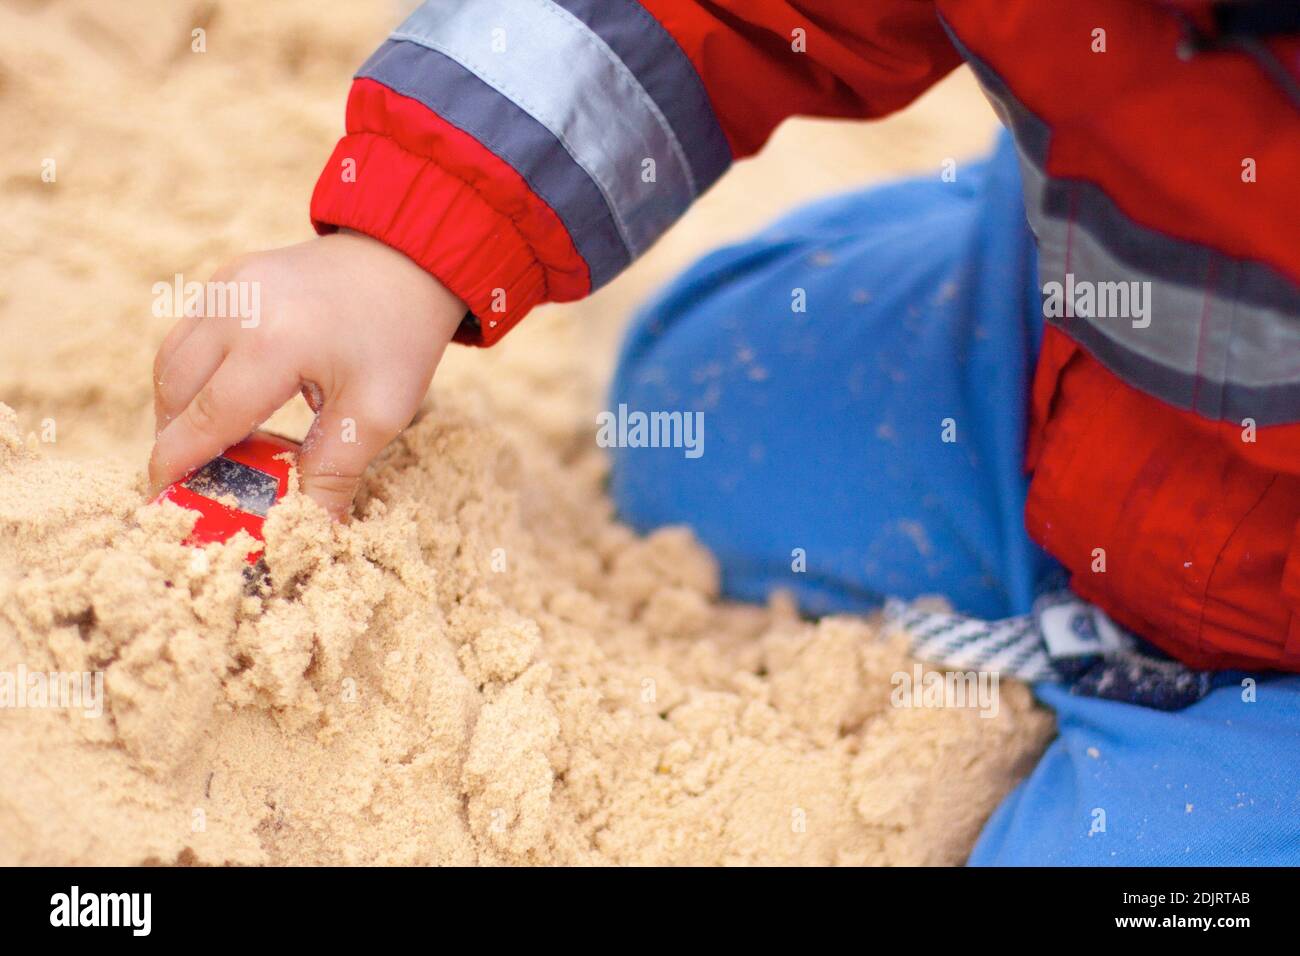 Midsection Of Boy Playing With Toy Car On Sand At Beach Stock Photo